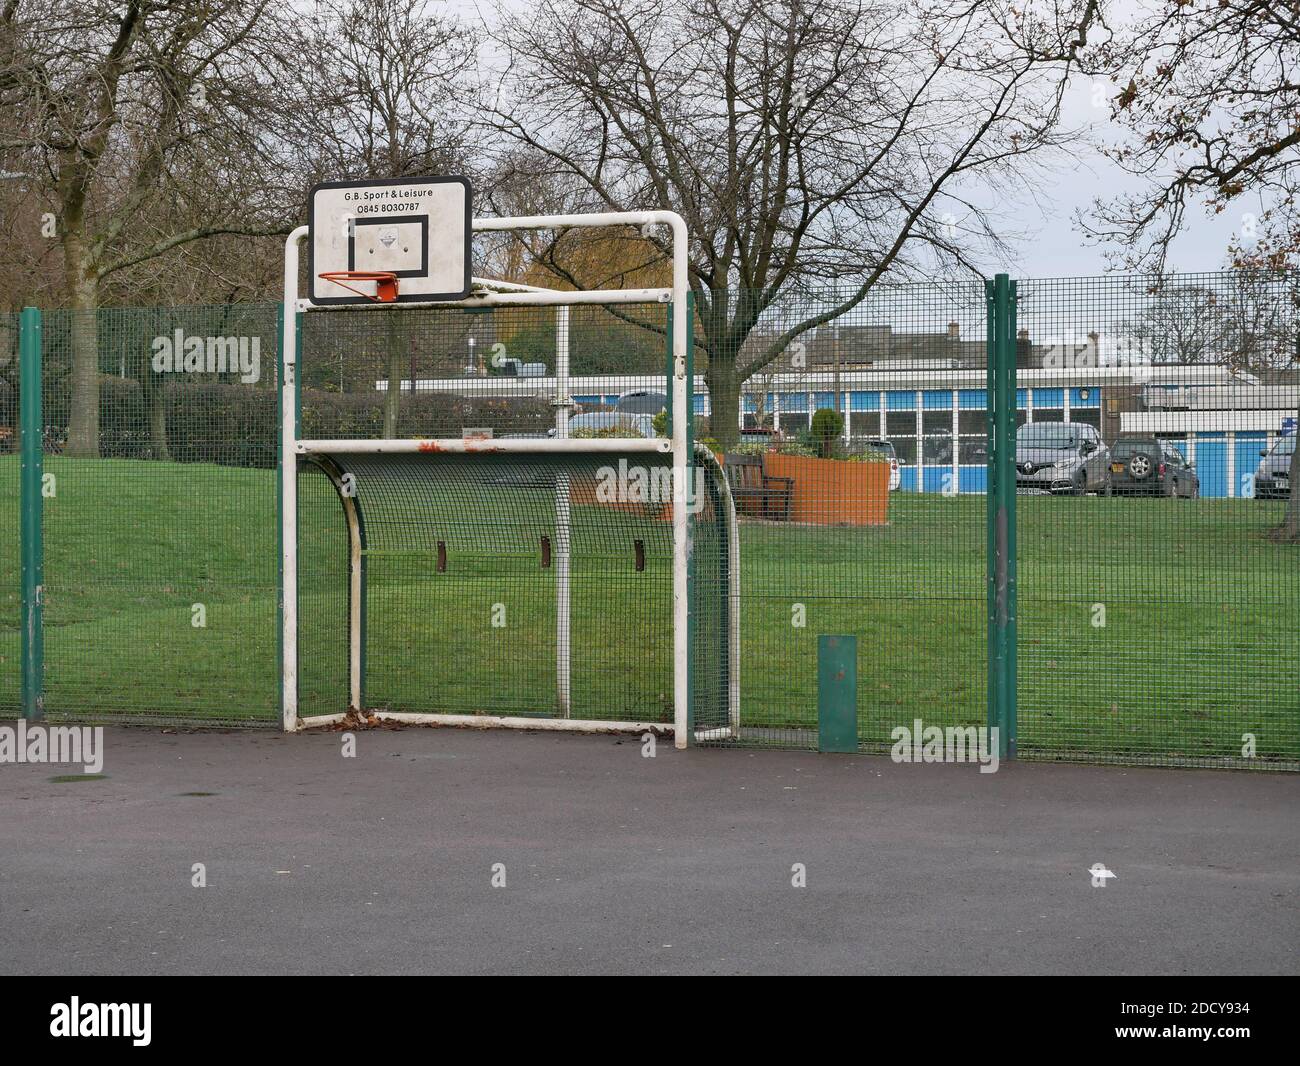 Orange basketball hoop white metal goal posts combined hard playing surface with tall green fencing surround grass behind Stock Photo